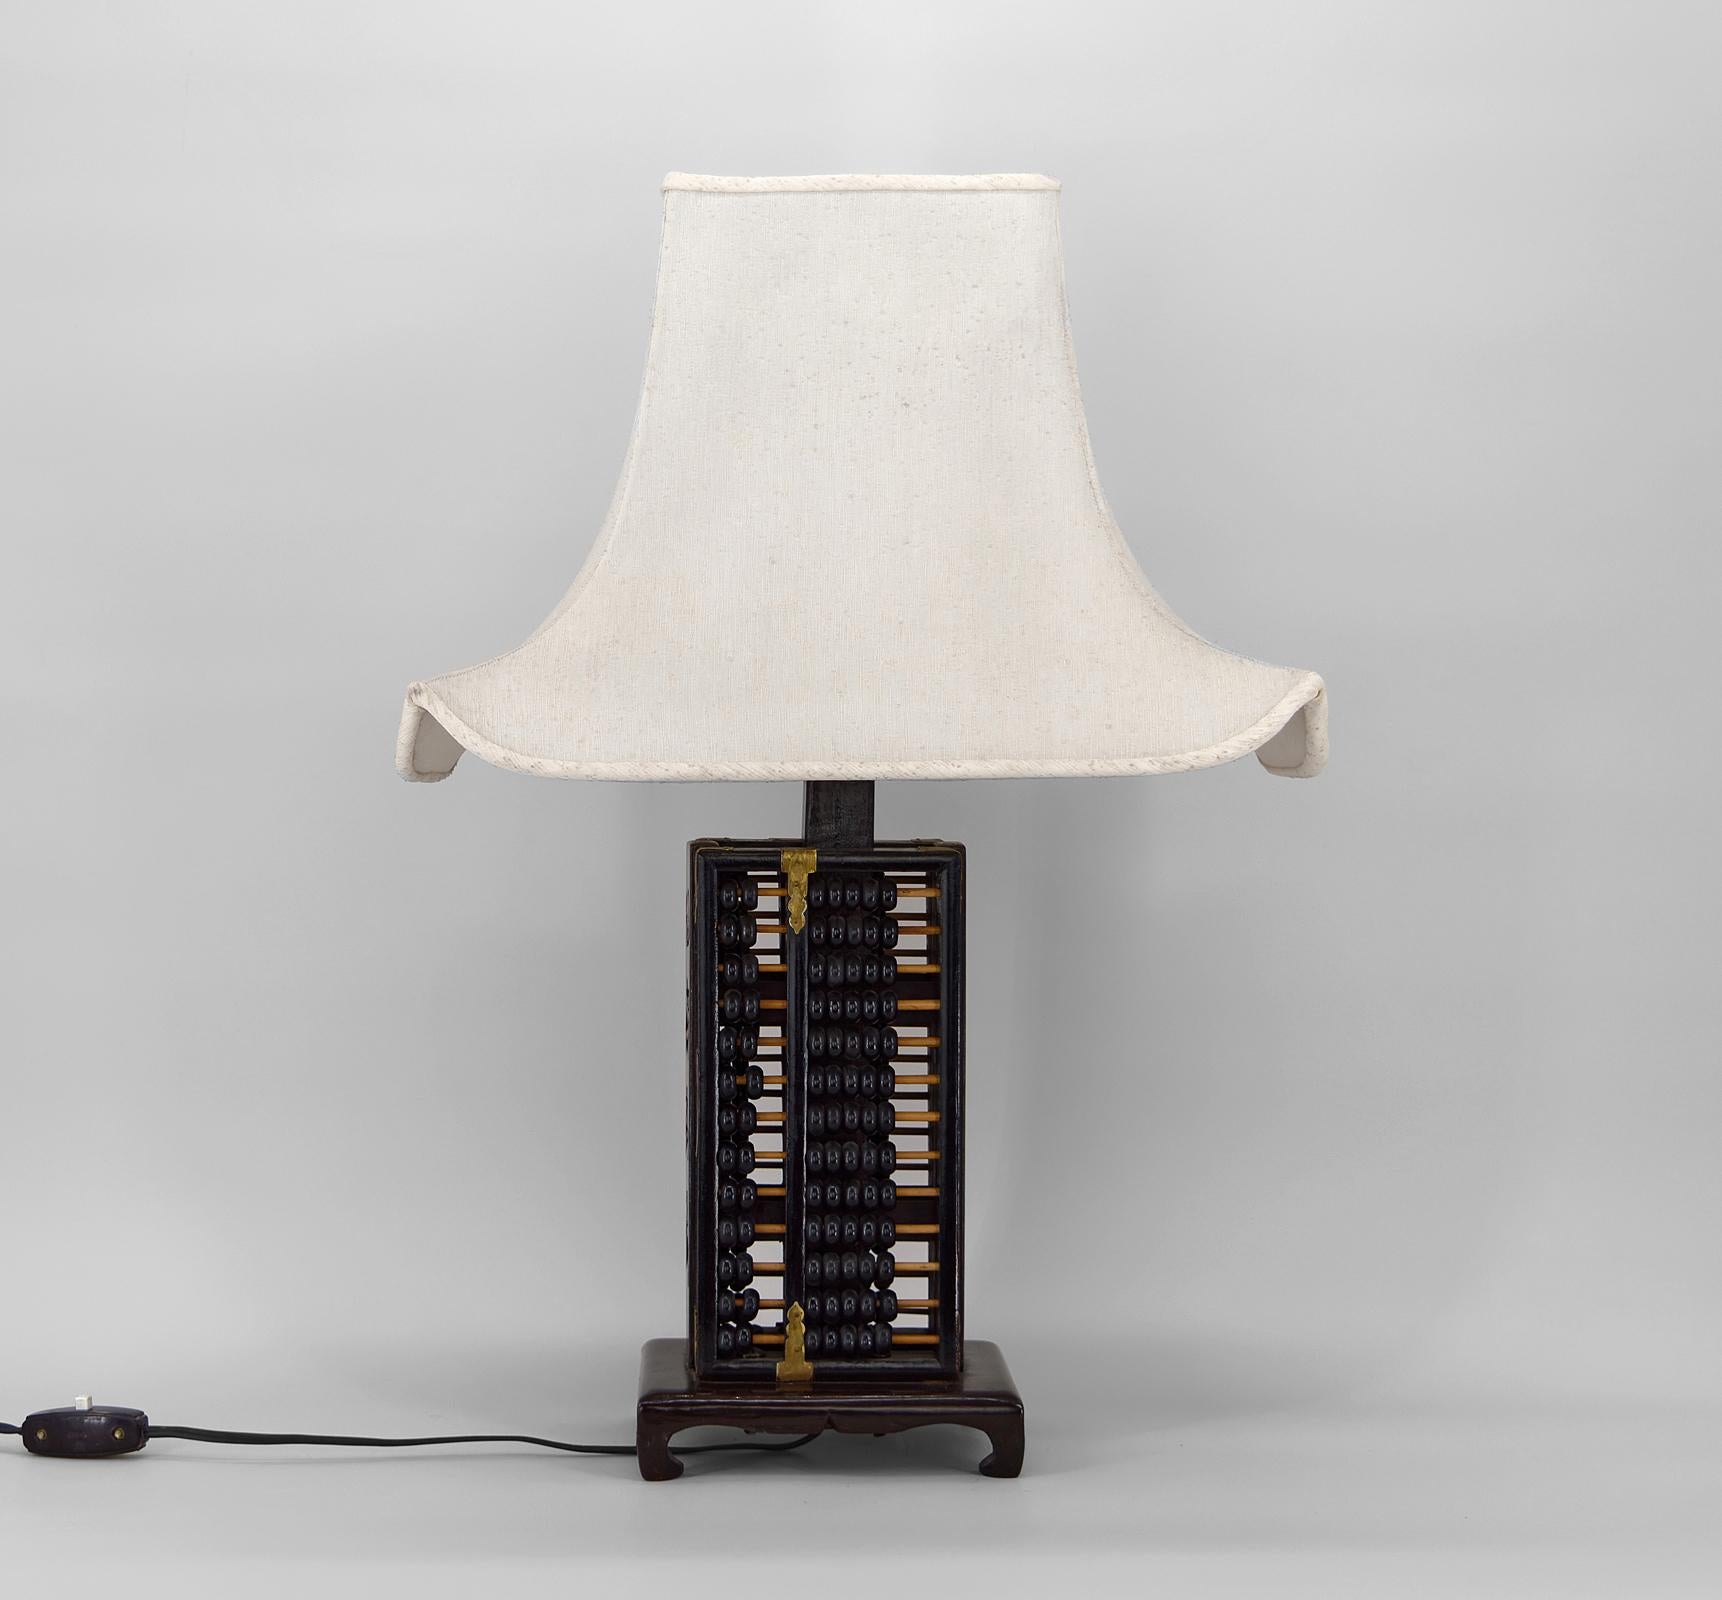 Old vintage Chinese abacus / Suanpan / chinese calculator from the 50s/60s, mounted as a lamp.
Shade with raised corners, pagoda style, reminiscent of the roofs of temples in the Far East.

Chinoiserie / Chinese Export, China, circa 1950.

In